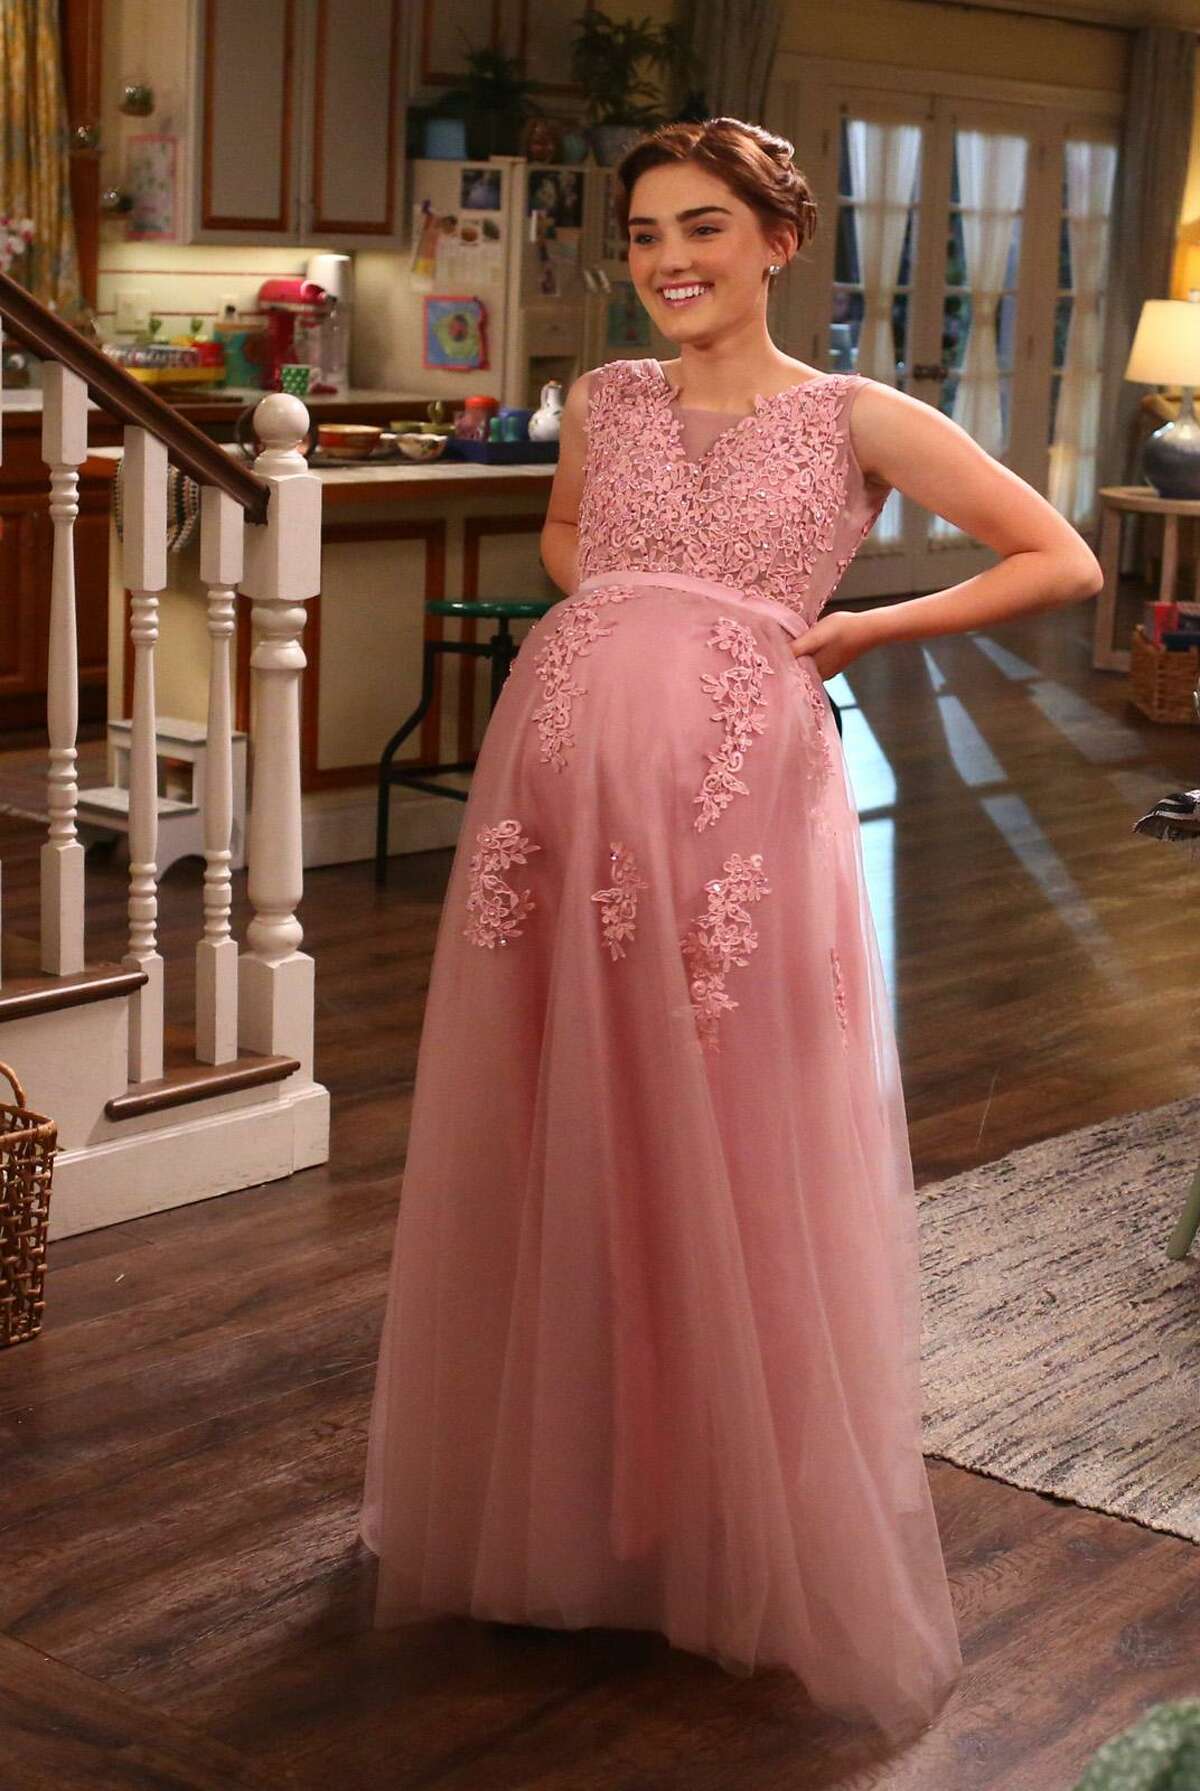 Actress Meg Donnell as Taylor Otto, a Westport teenager dressed for Halloween as a pregnant Norwalk prom girl in the "Boo" episode of "American Housewife." While the jokes a Norwalks expense have been ongoing, the Halloween episode seemed to particularly stir up anger among residents.